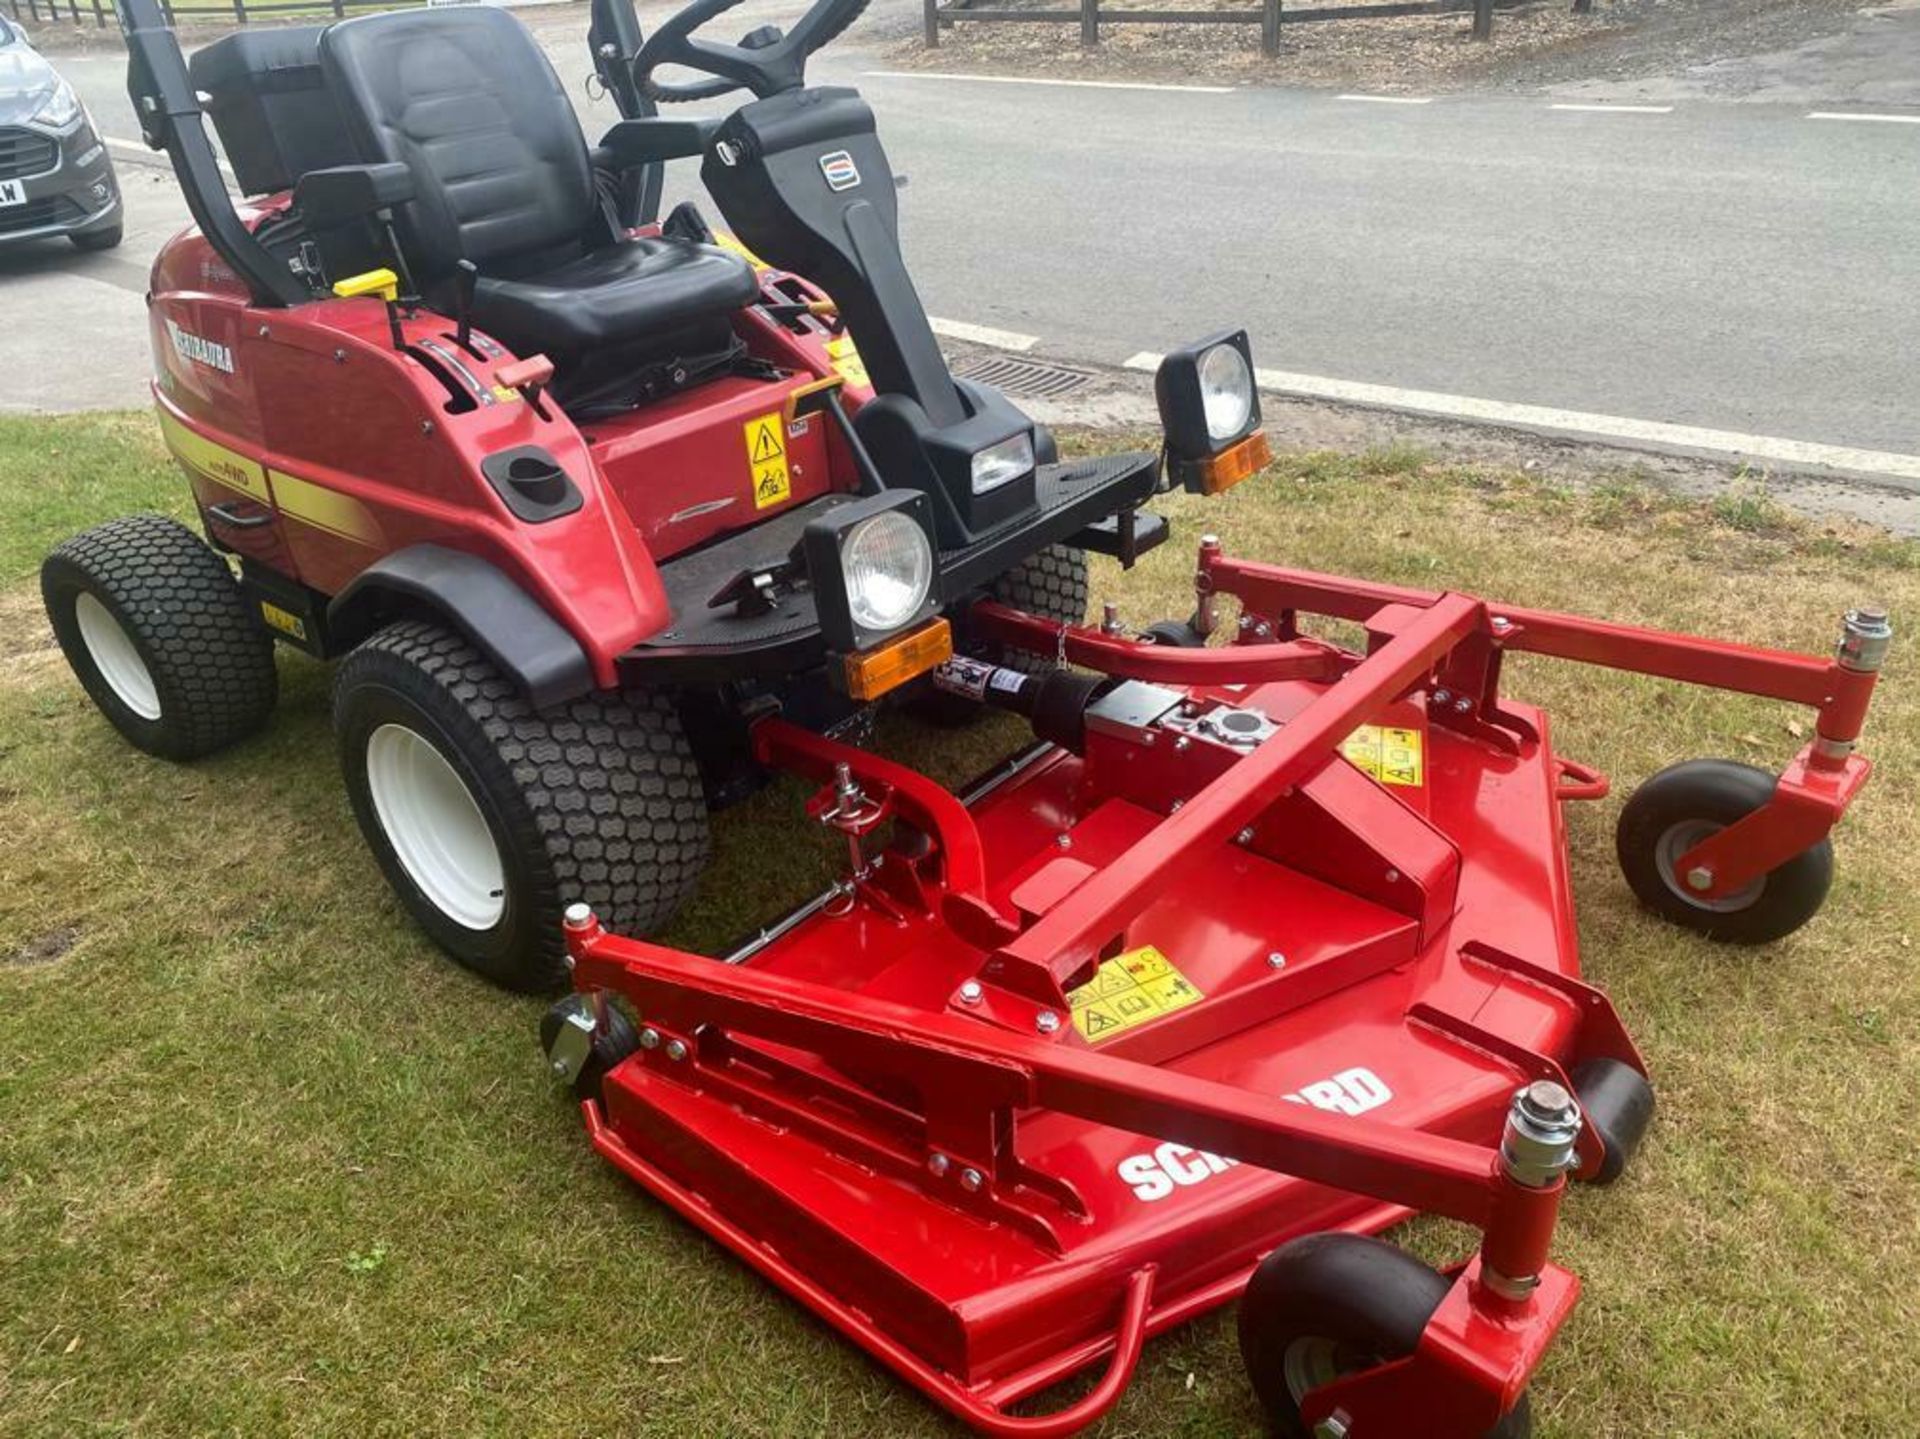 SHIBAURA CM374 UPFRONT ROTARY MOWER, 37HP, BRAND NEW 60" CUT DECK NEVER USED, DIESEL, YEAR 2014 - Image 3 of 7